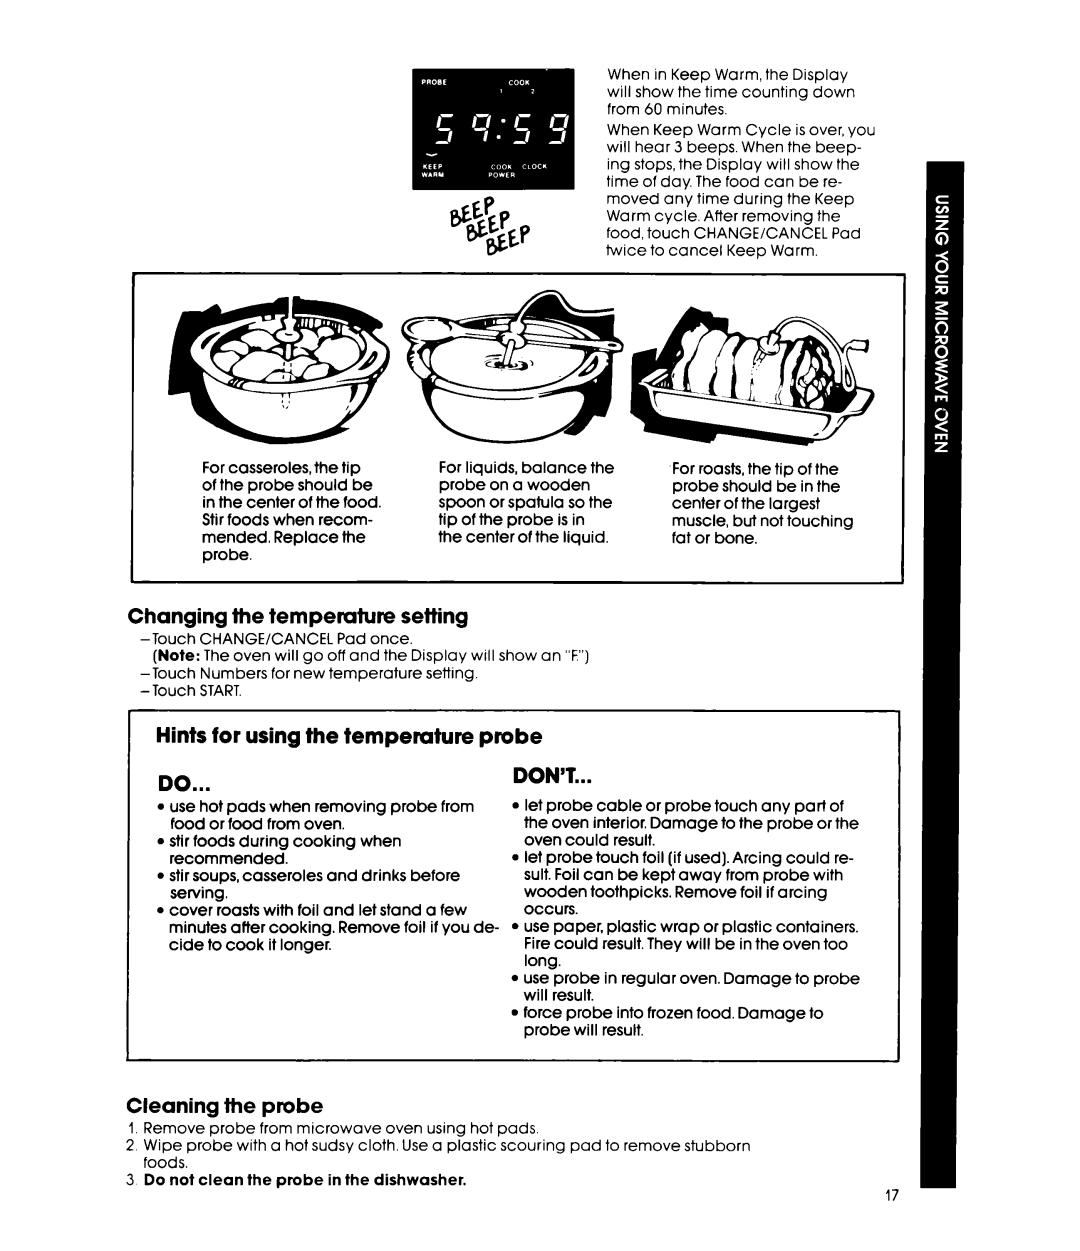 Whirlpool MW3500XM manual ~Hints for using the temperature probe DO, Changing the temperwture setting, Cleaning the probe 